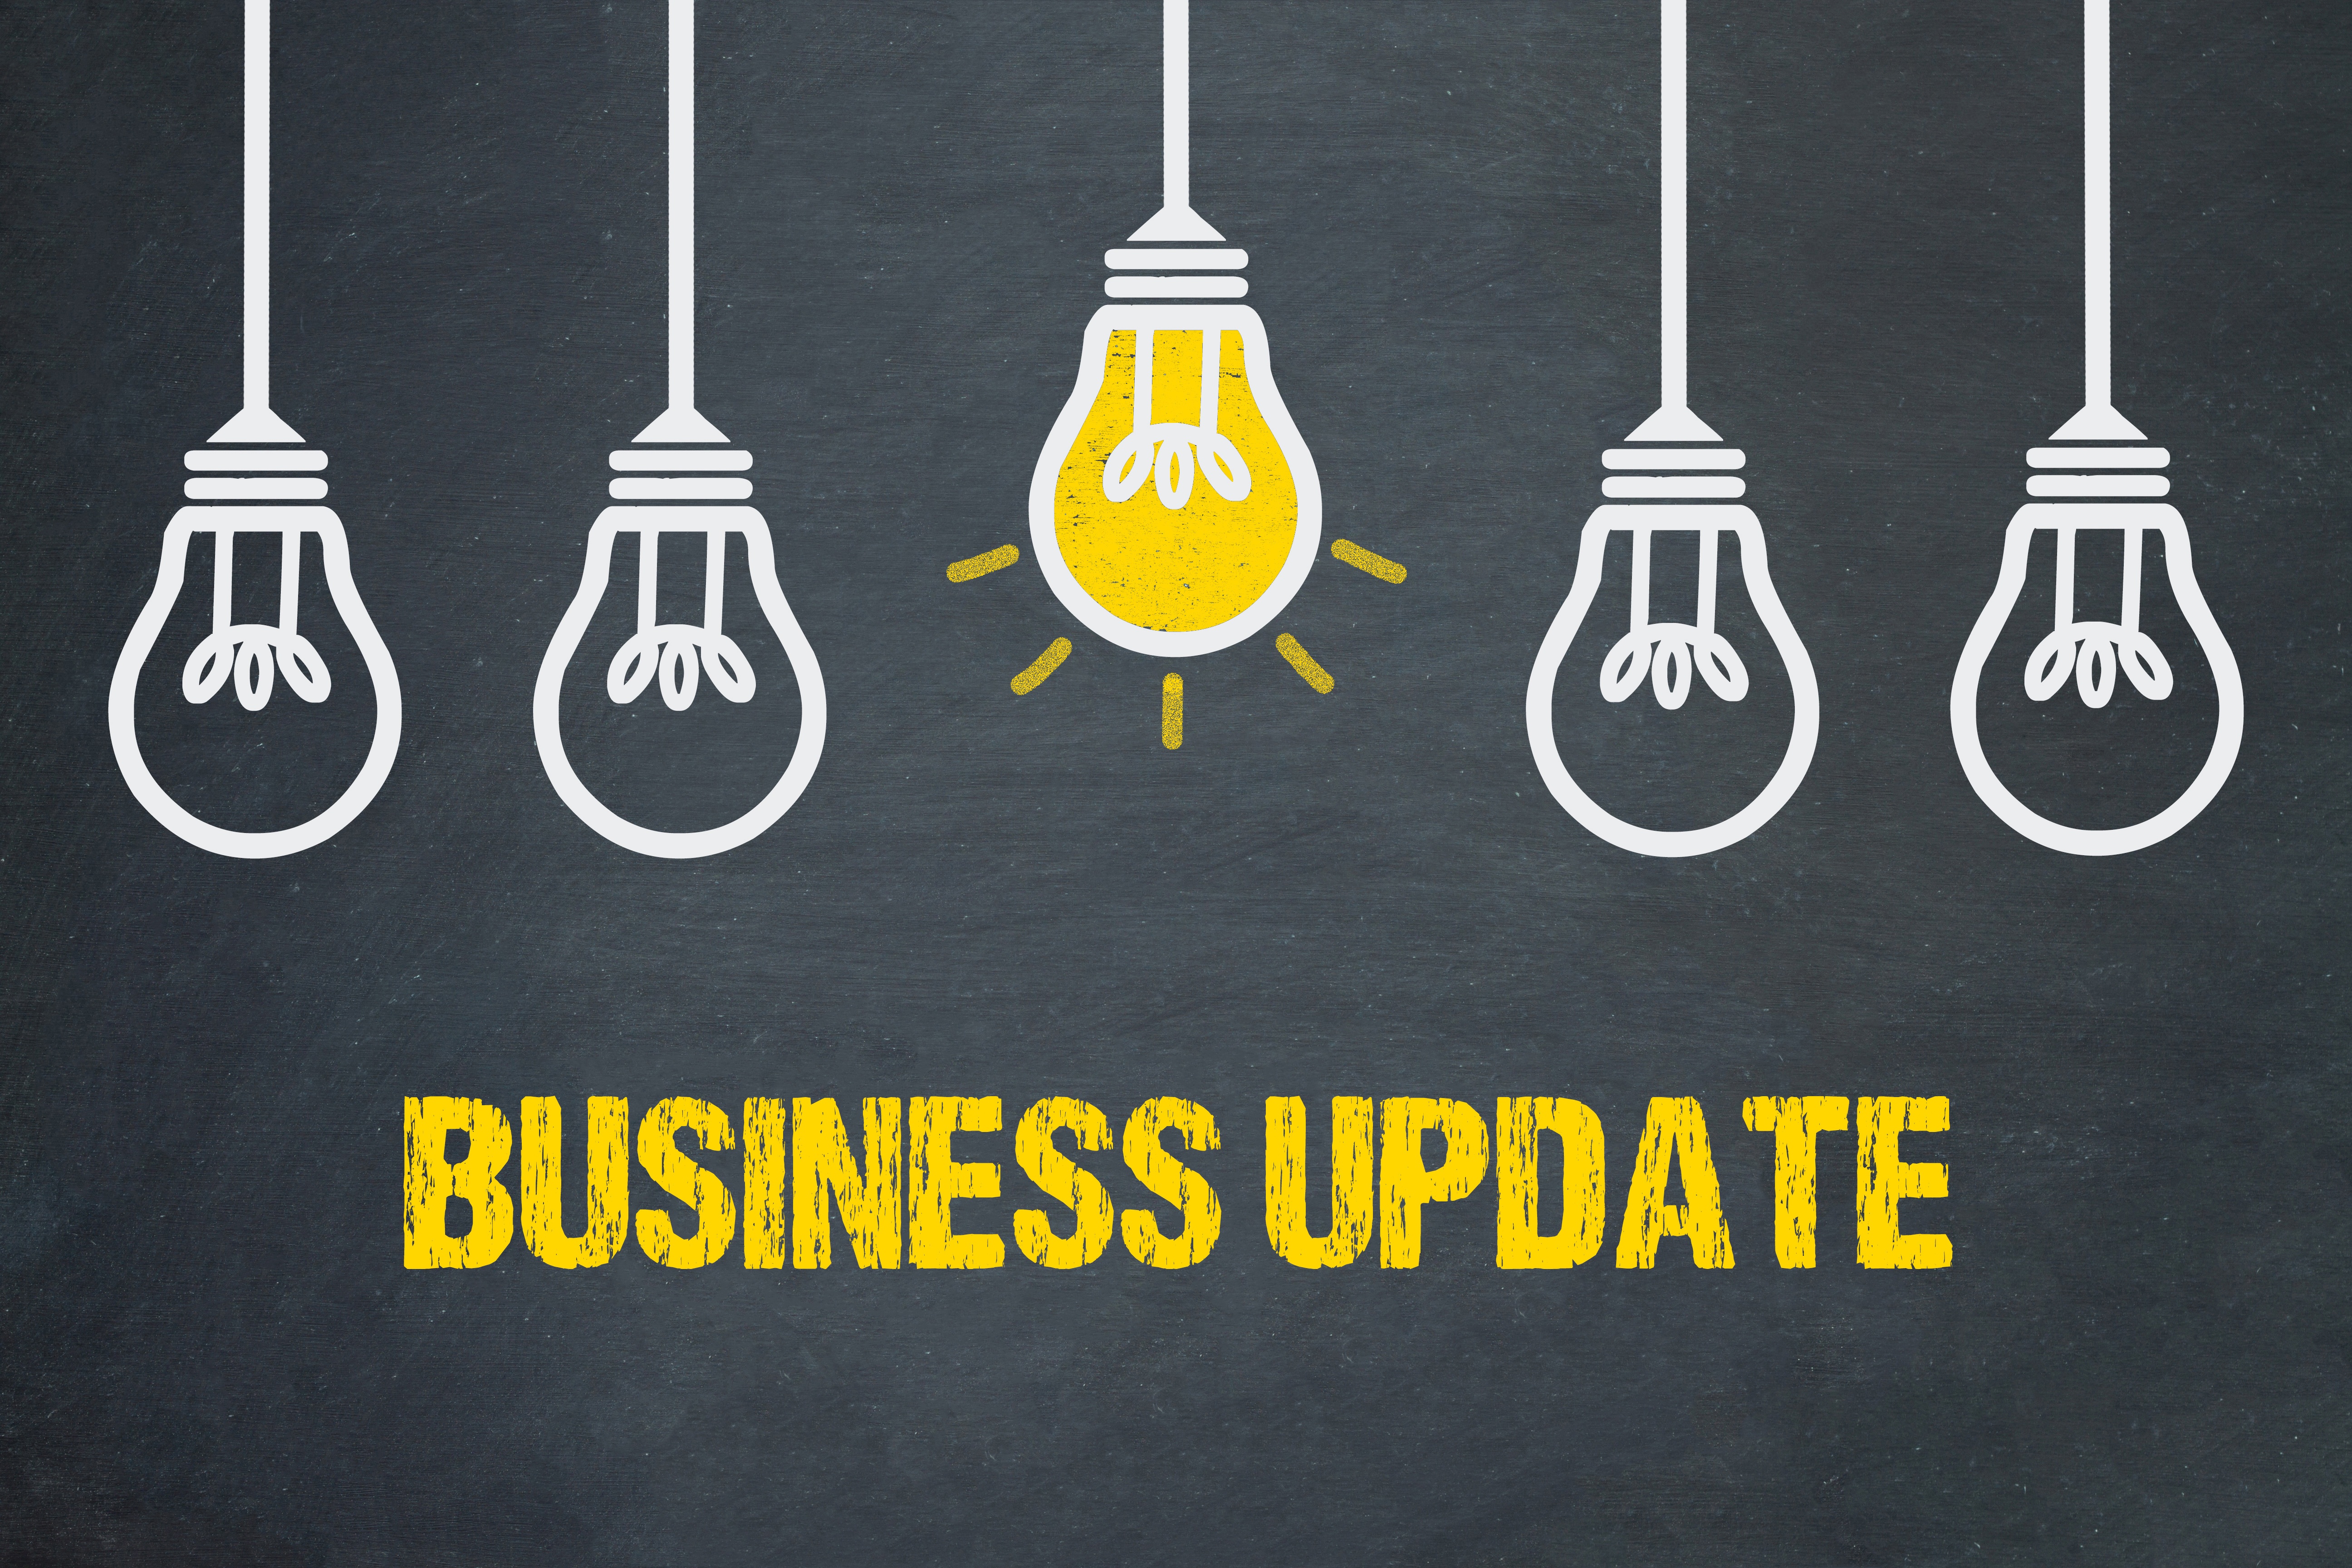 Business Update Graphic